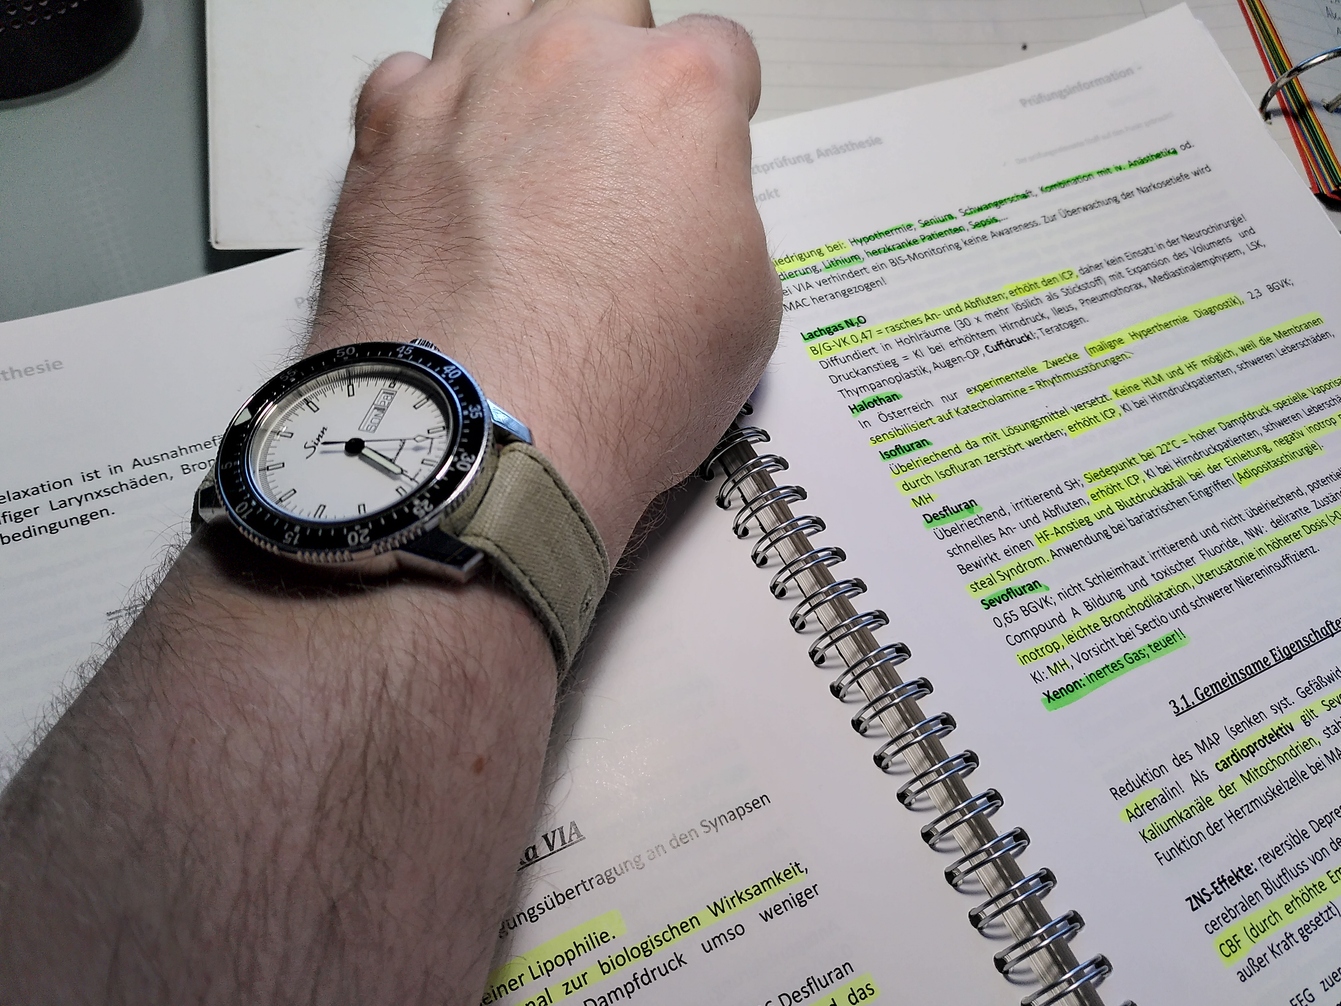 Sinn 104 on a canvas NATO strap while studying for my final specialist examination in Anesthesiology